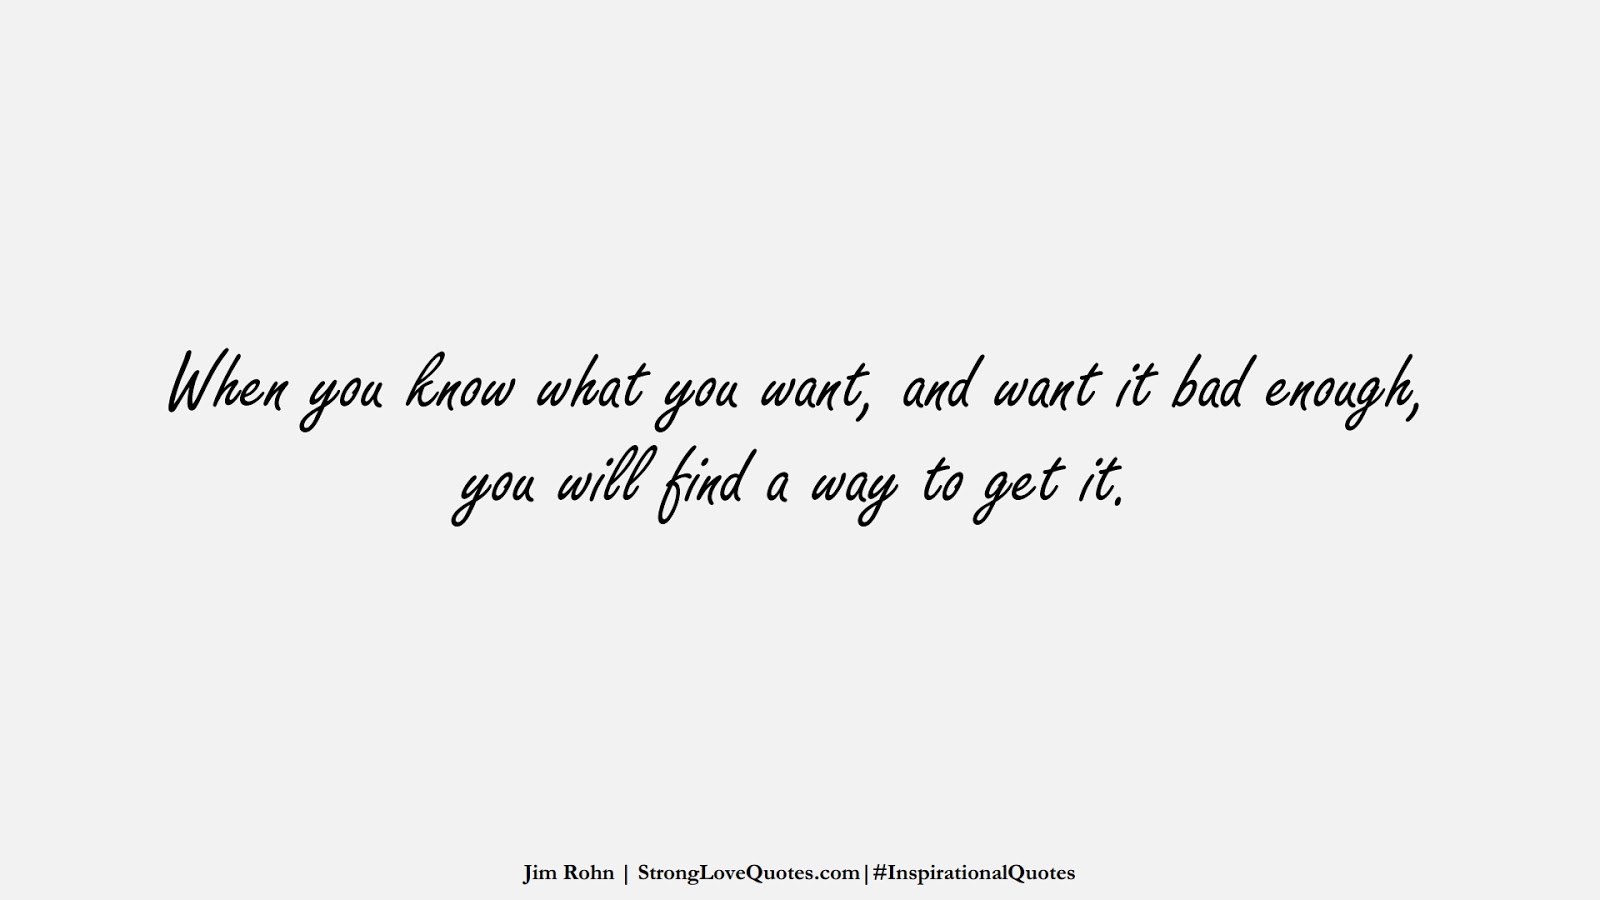 When you know what you want, and want it bad enough, you will find a way to get it. (Jim Rohn);  #InspirationalQuotes